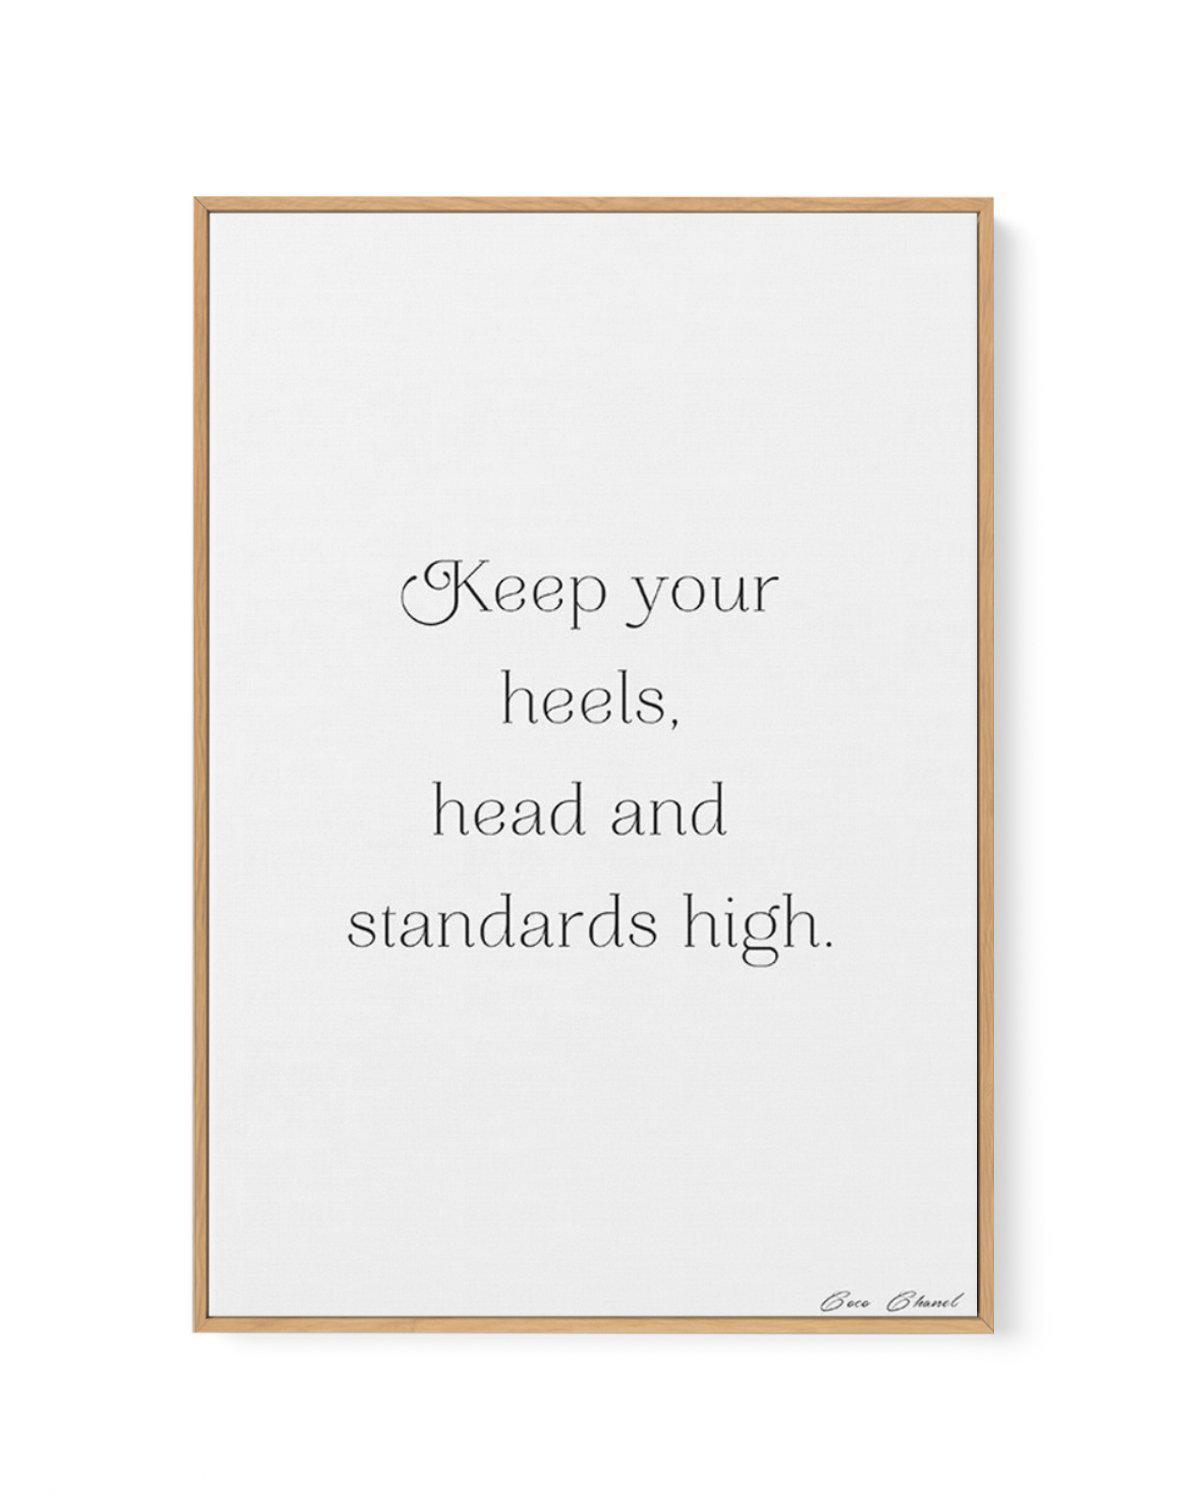 Keep your head, heels and standards high, Coco Chanel quote